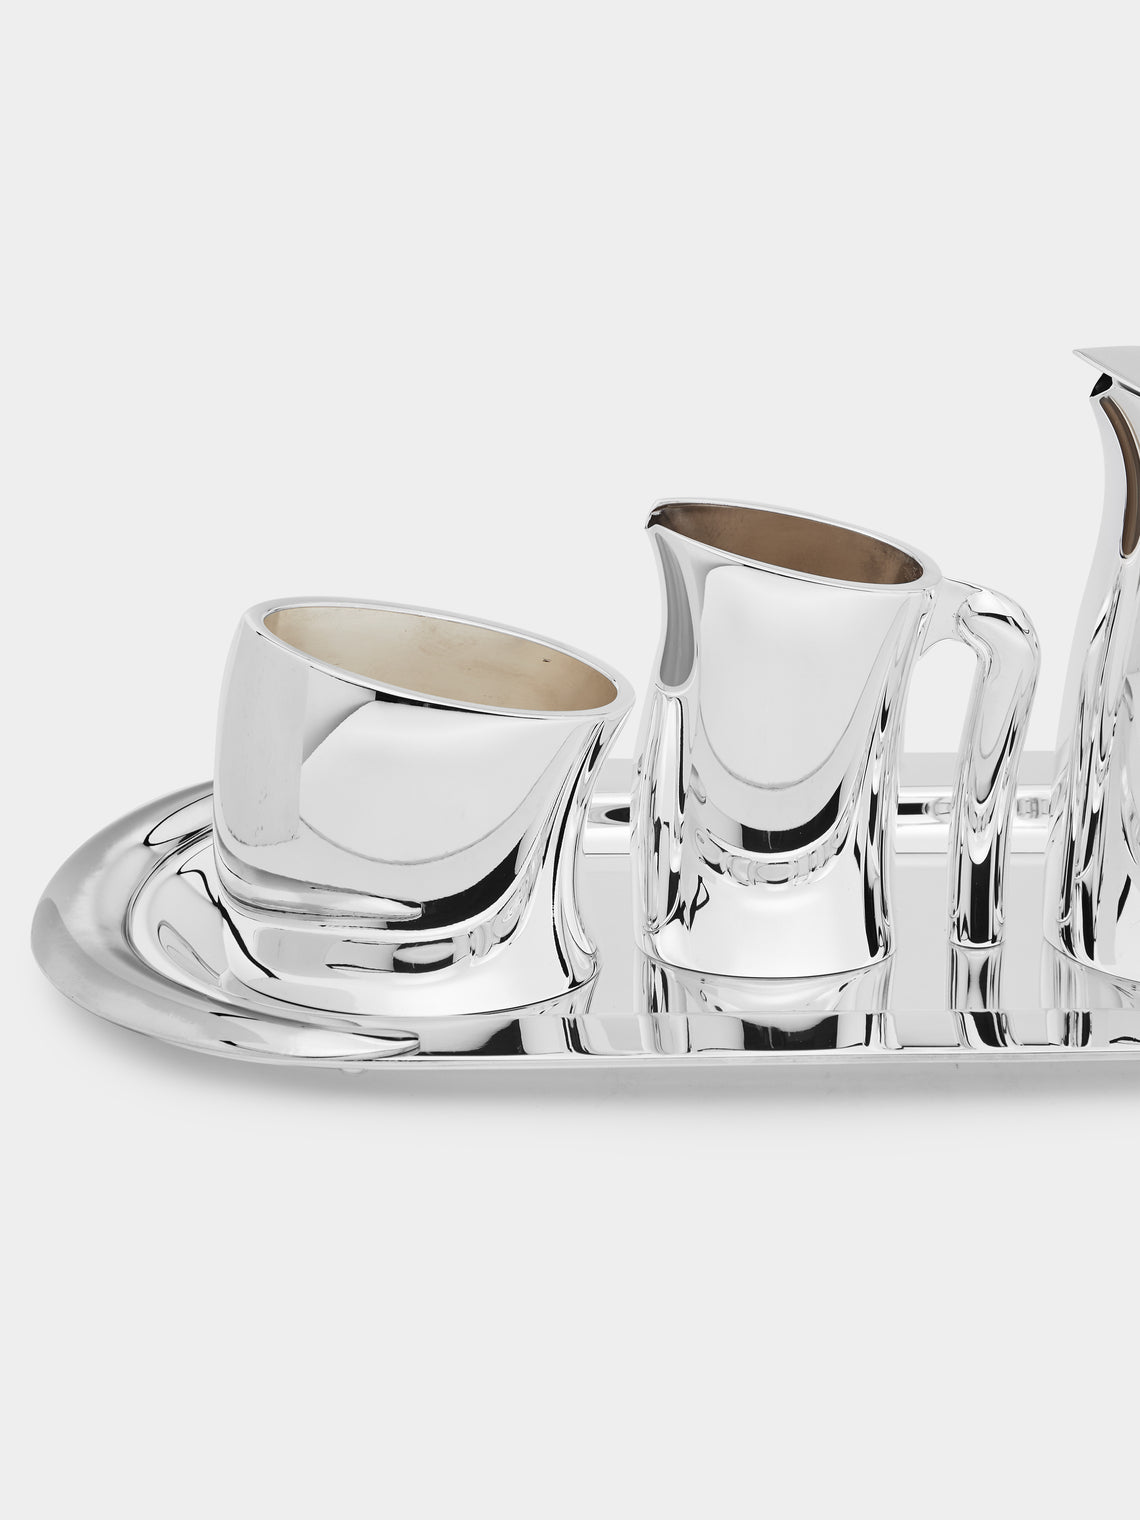 De Vecchi - Infill Silver-Plated Tea and Coffee Set -  - ABASK